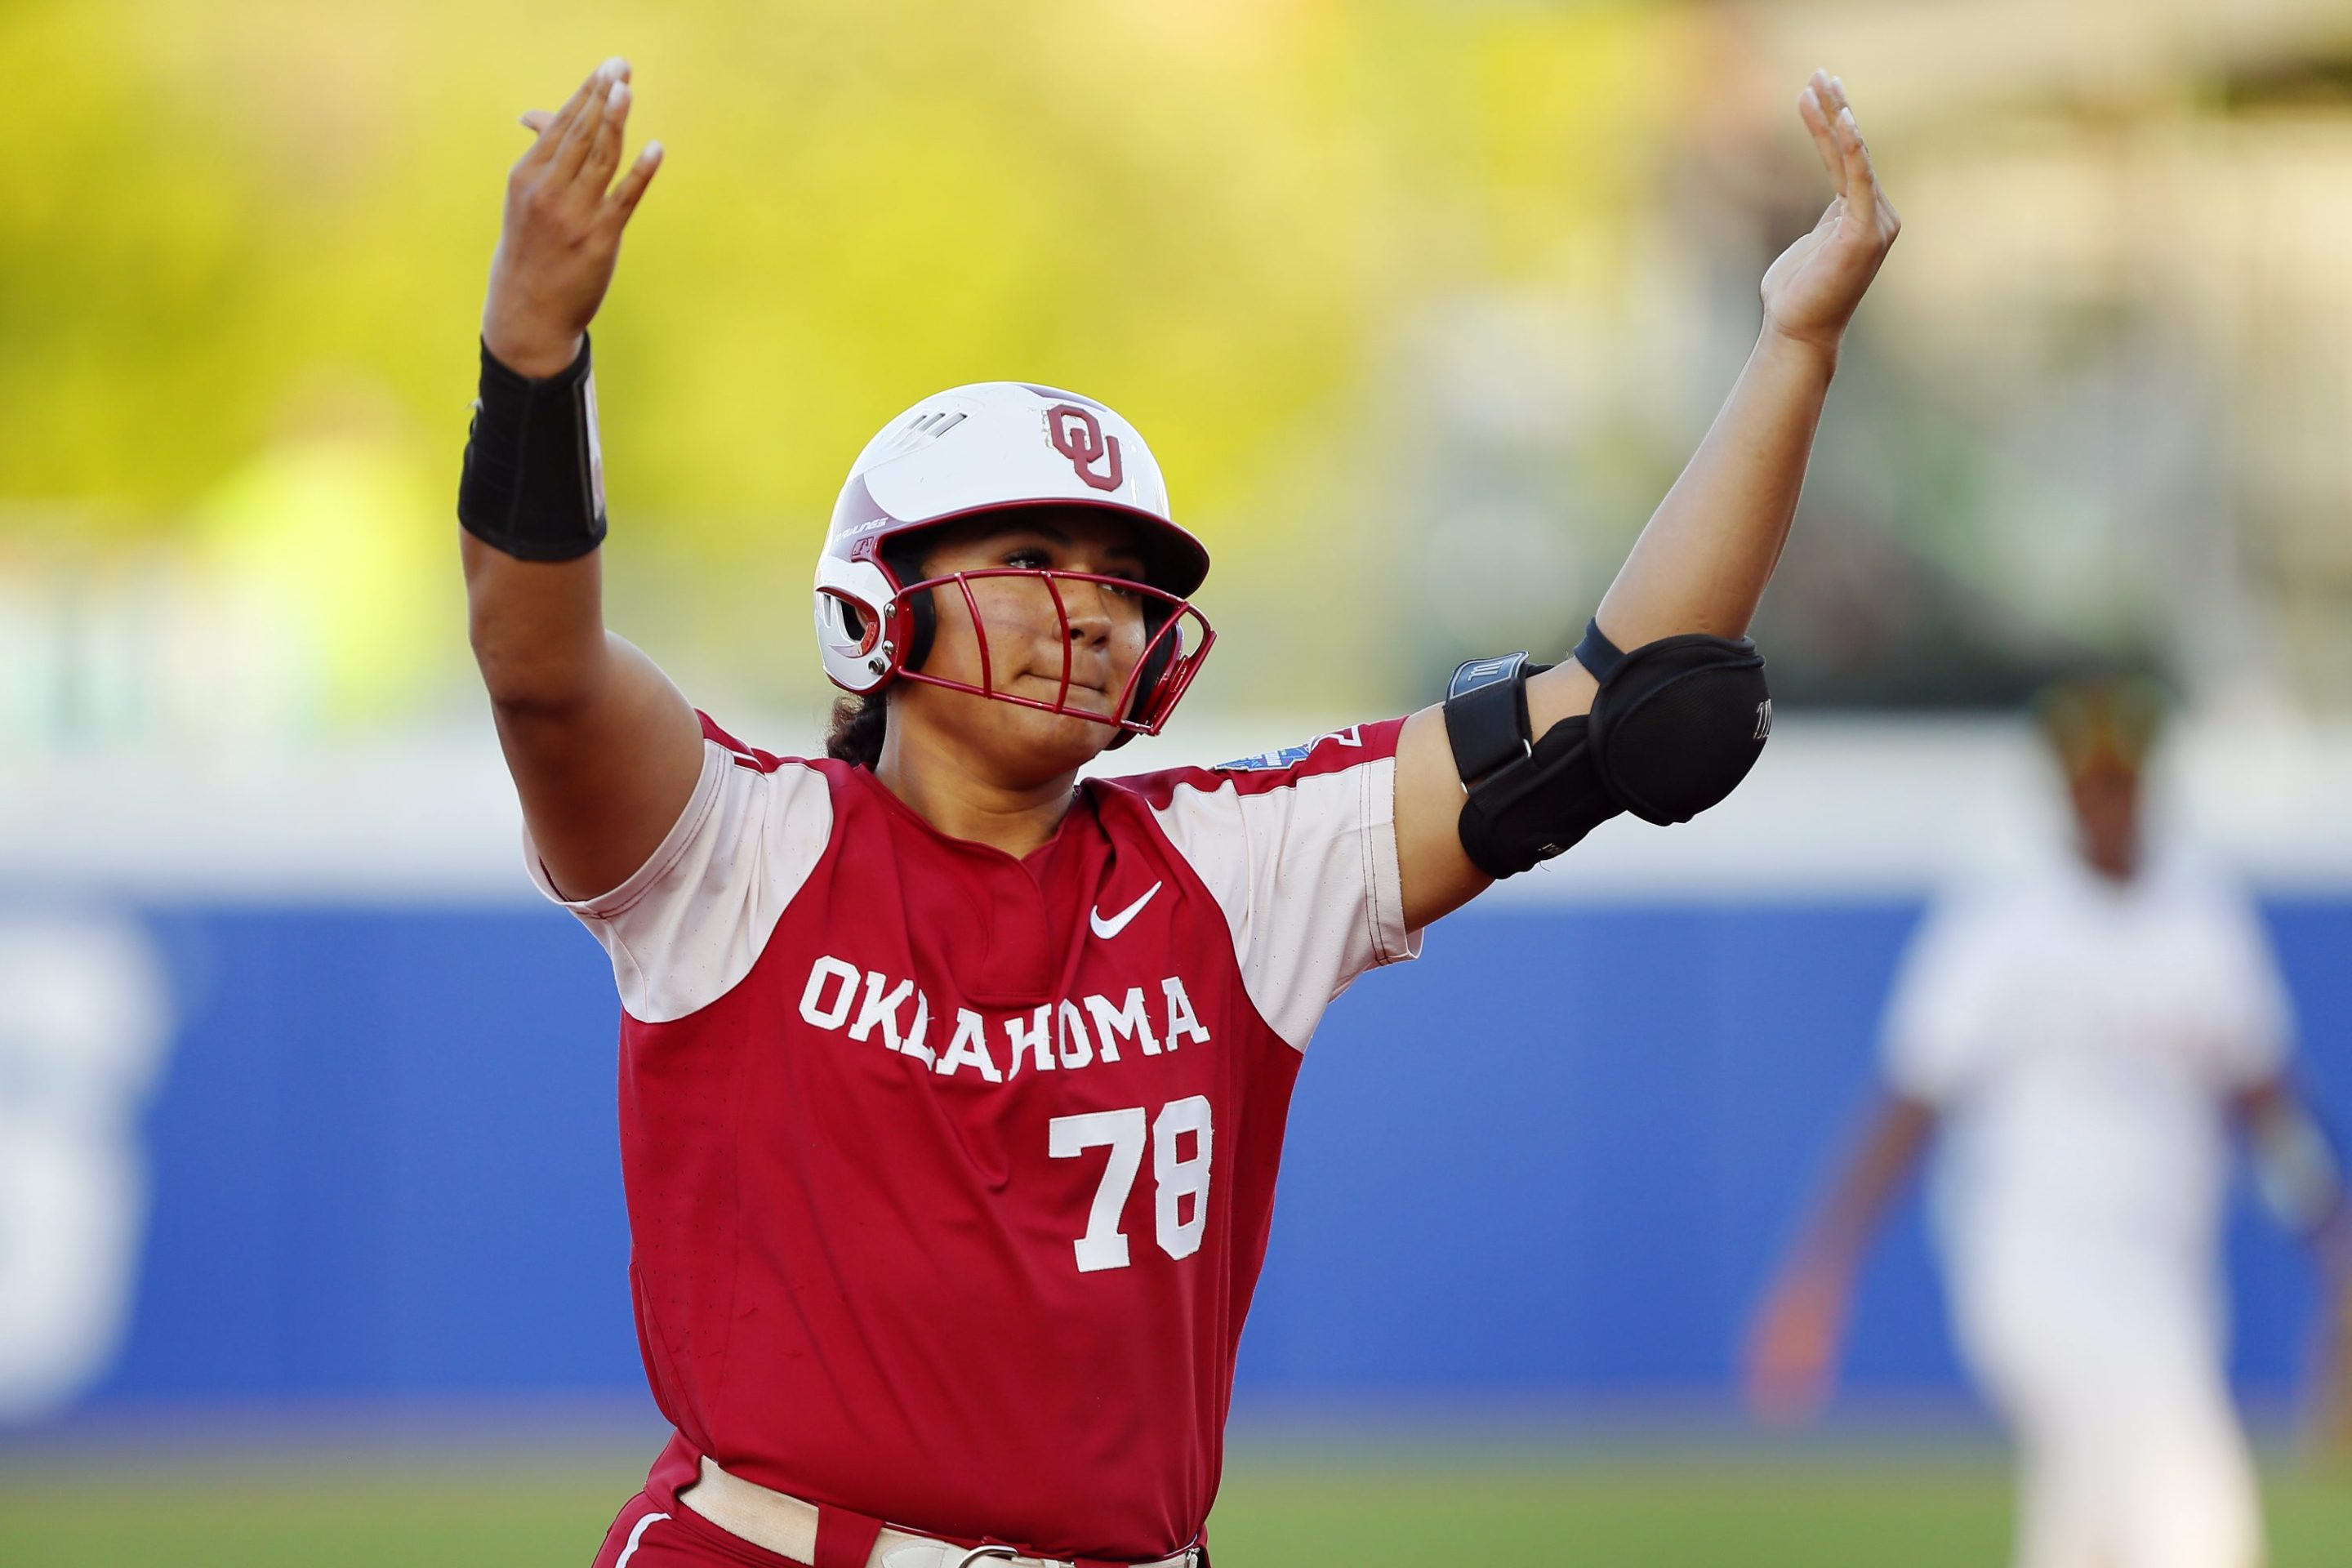 Jocelyn Alo #78 of the Oklahoma Sooners throws her hands in the air after a softball play.